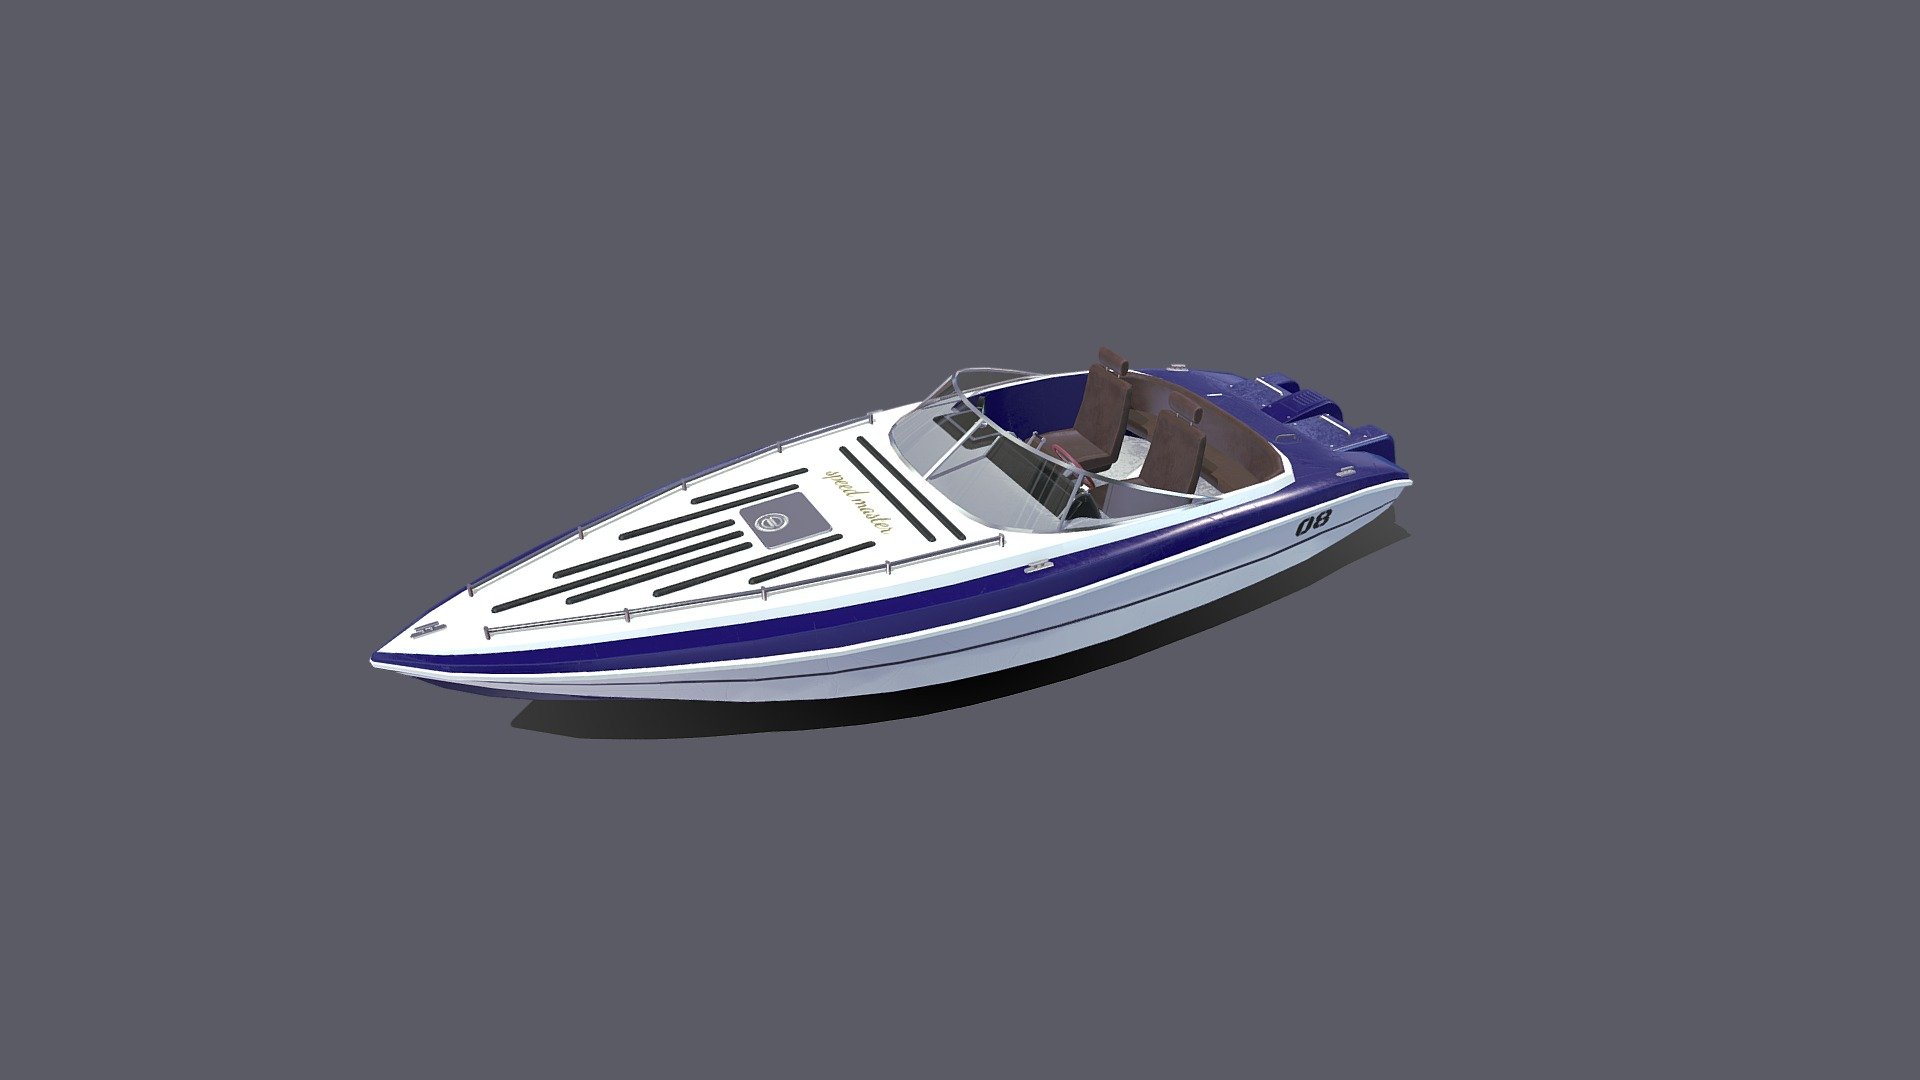 Speed boat 




Low-poly

Textures are in PNG format 4096x4096 PBR Metalness 1 set

Files unit: Centimeters

Available formats:MAX 2018 and 2015, OBJ, MTL, FBX

If you need any other file format you can always request it.

All formats include materials and textures.
 - Speedboat - Buy Royalty Free 3D model by MaX3Dd 3d model